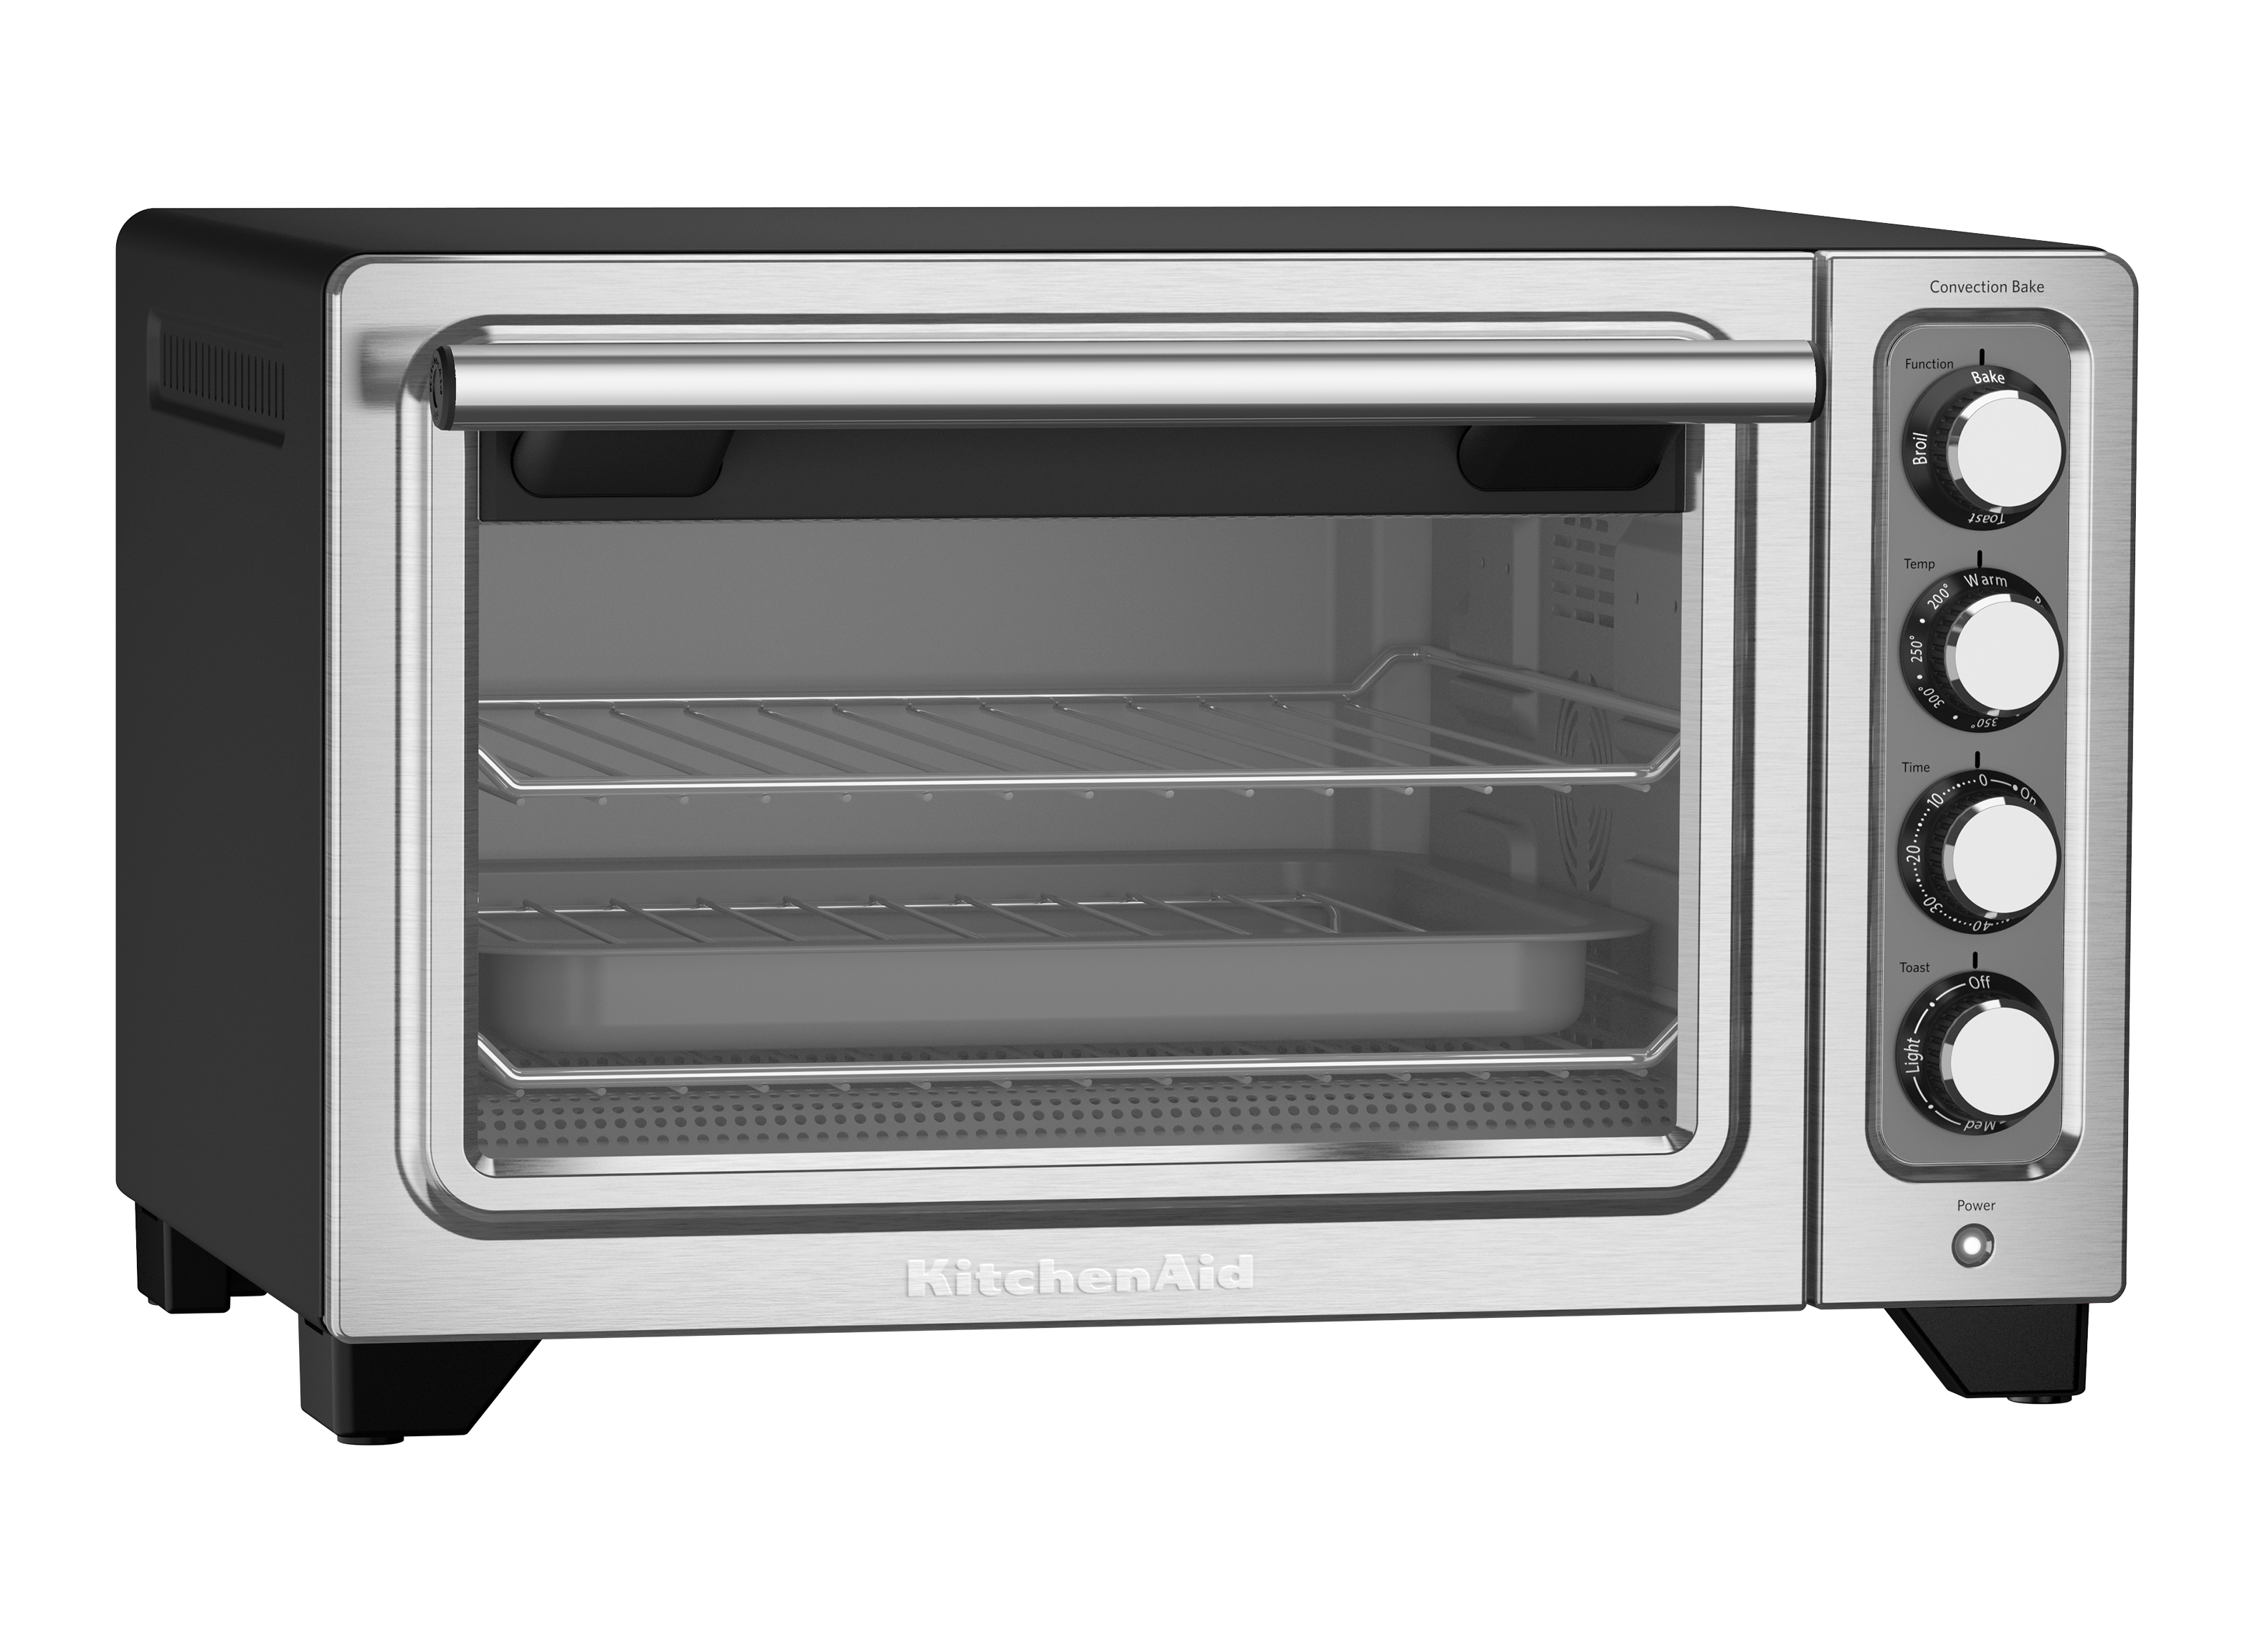 KitchenAid KCO255BM Toaster & Toaster Oven Review - Consumer Reports